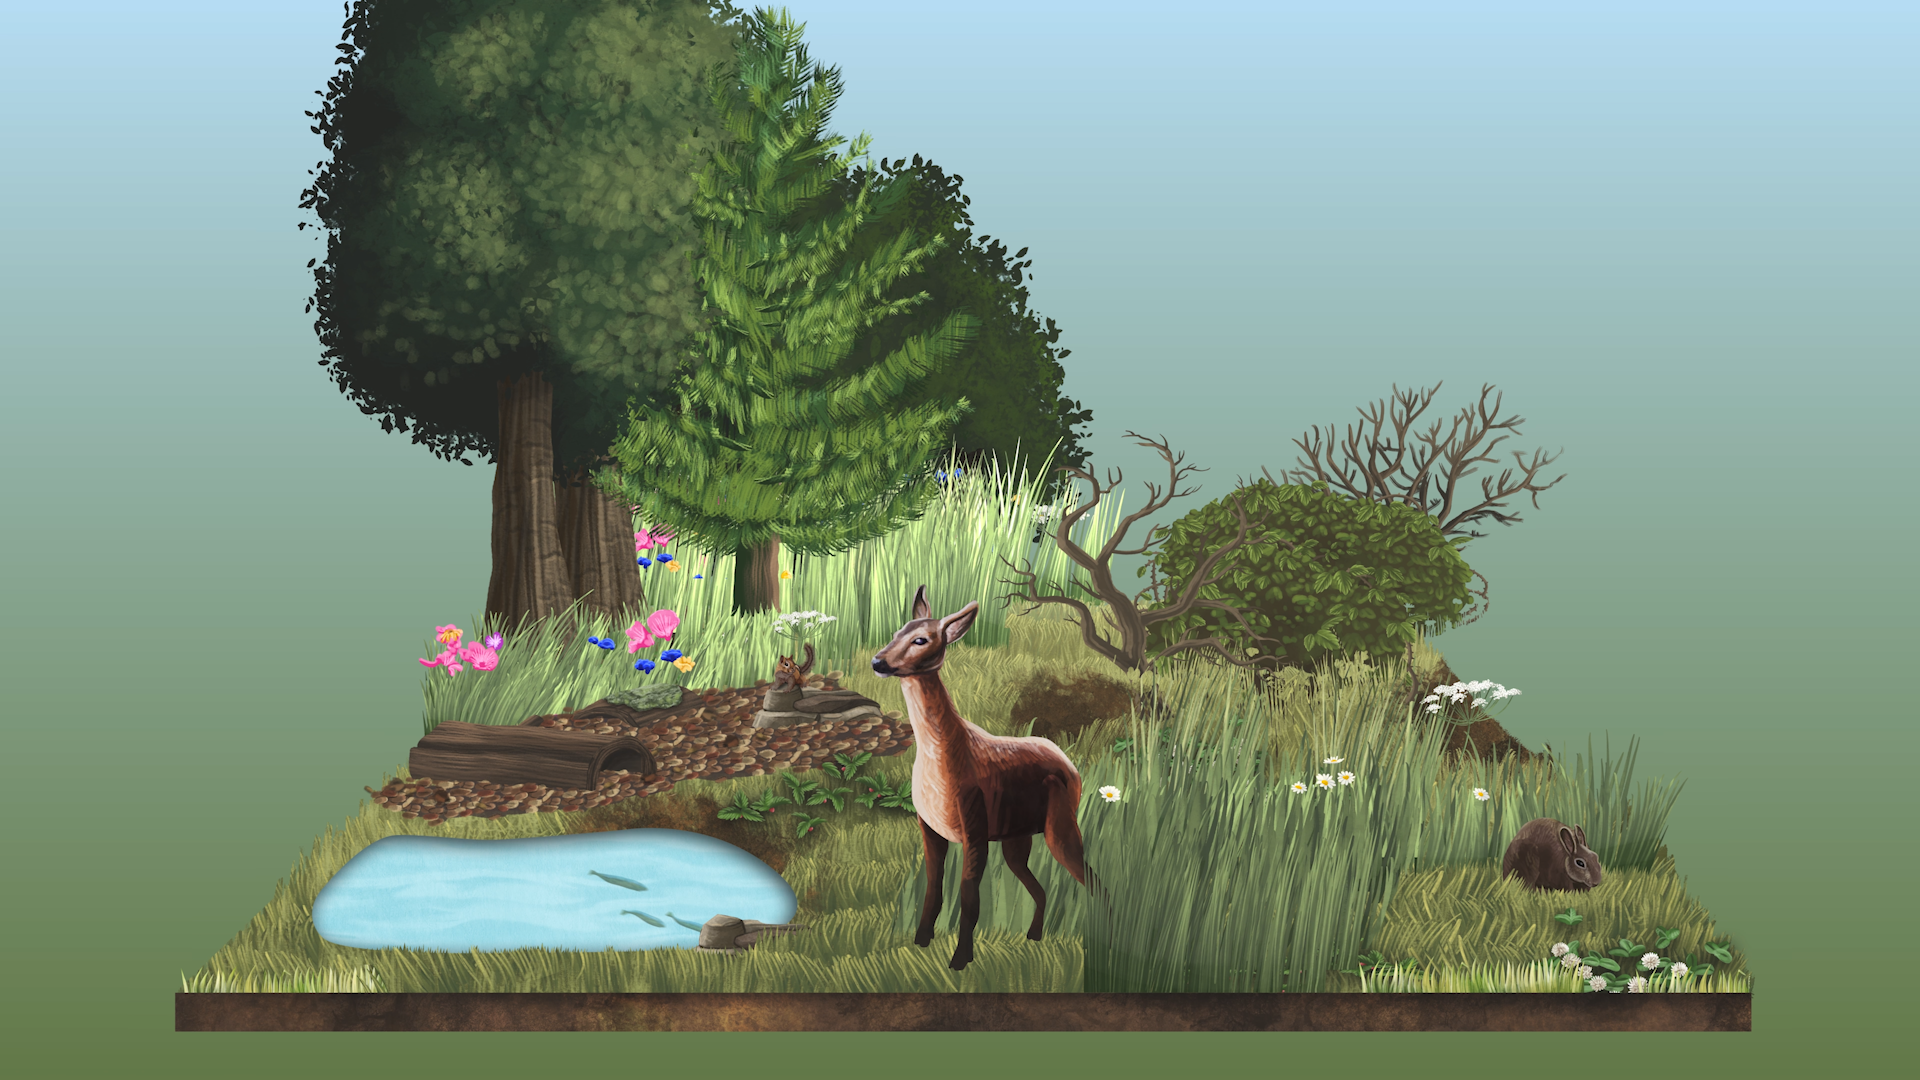 An artist's illustration of a rewilded area, with trees, flowers, grasses, a pond, and deer.